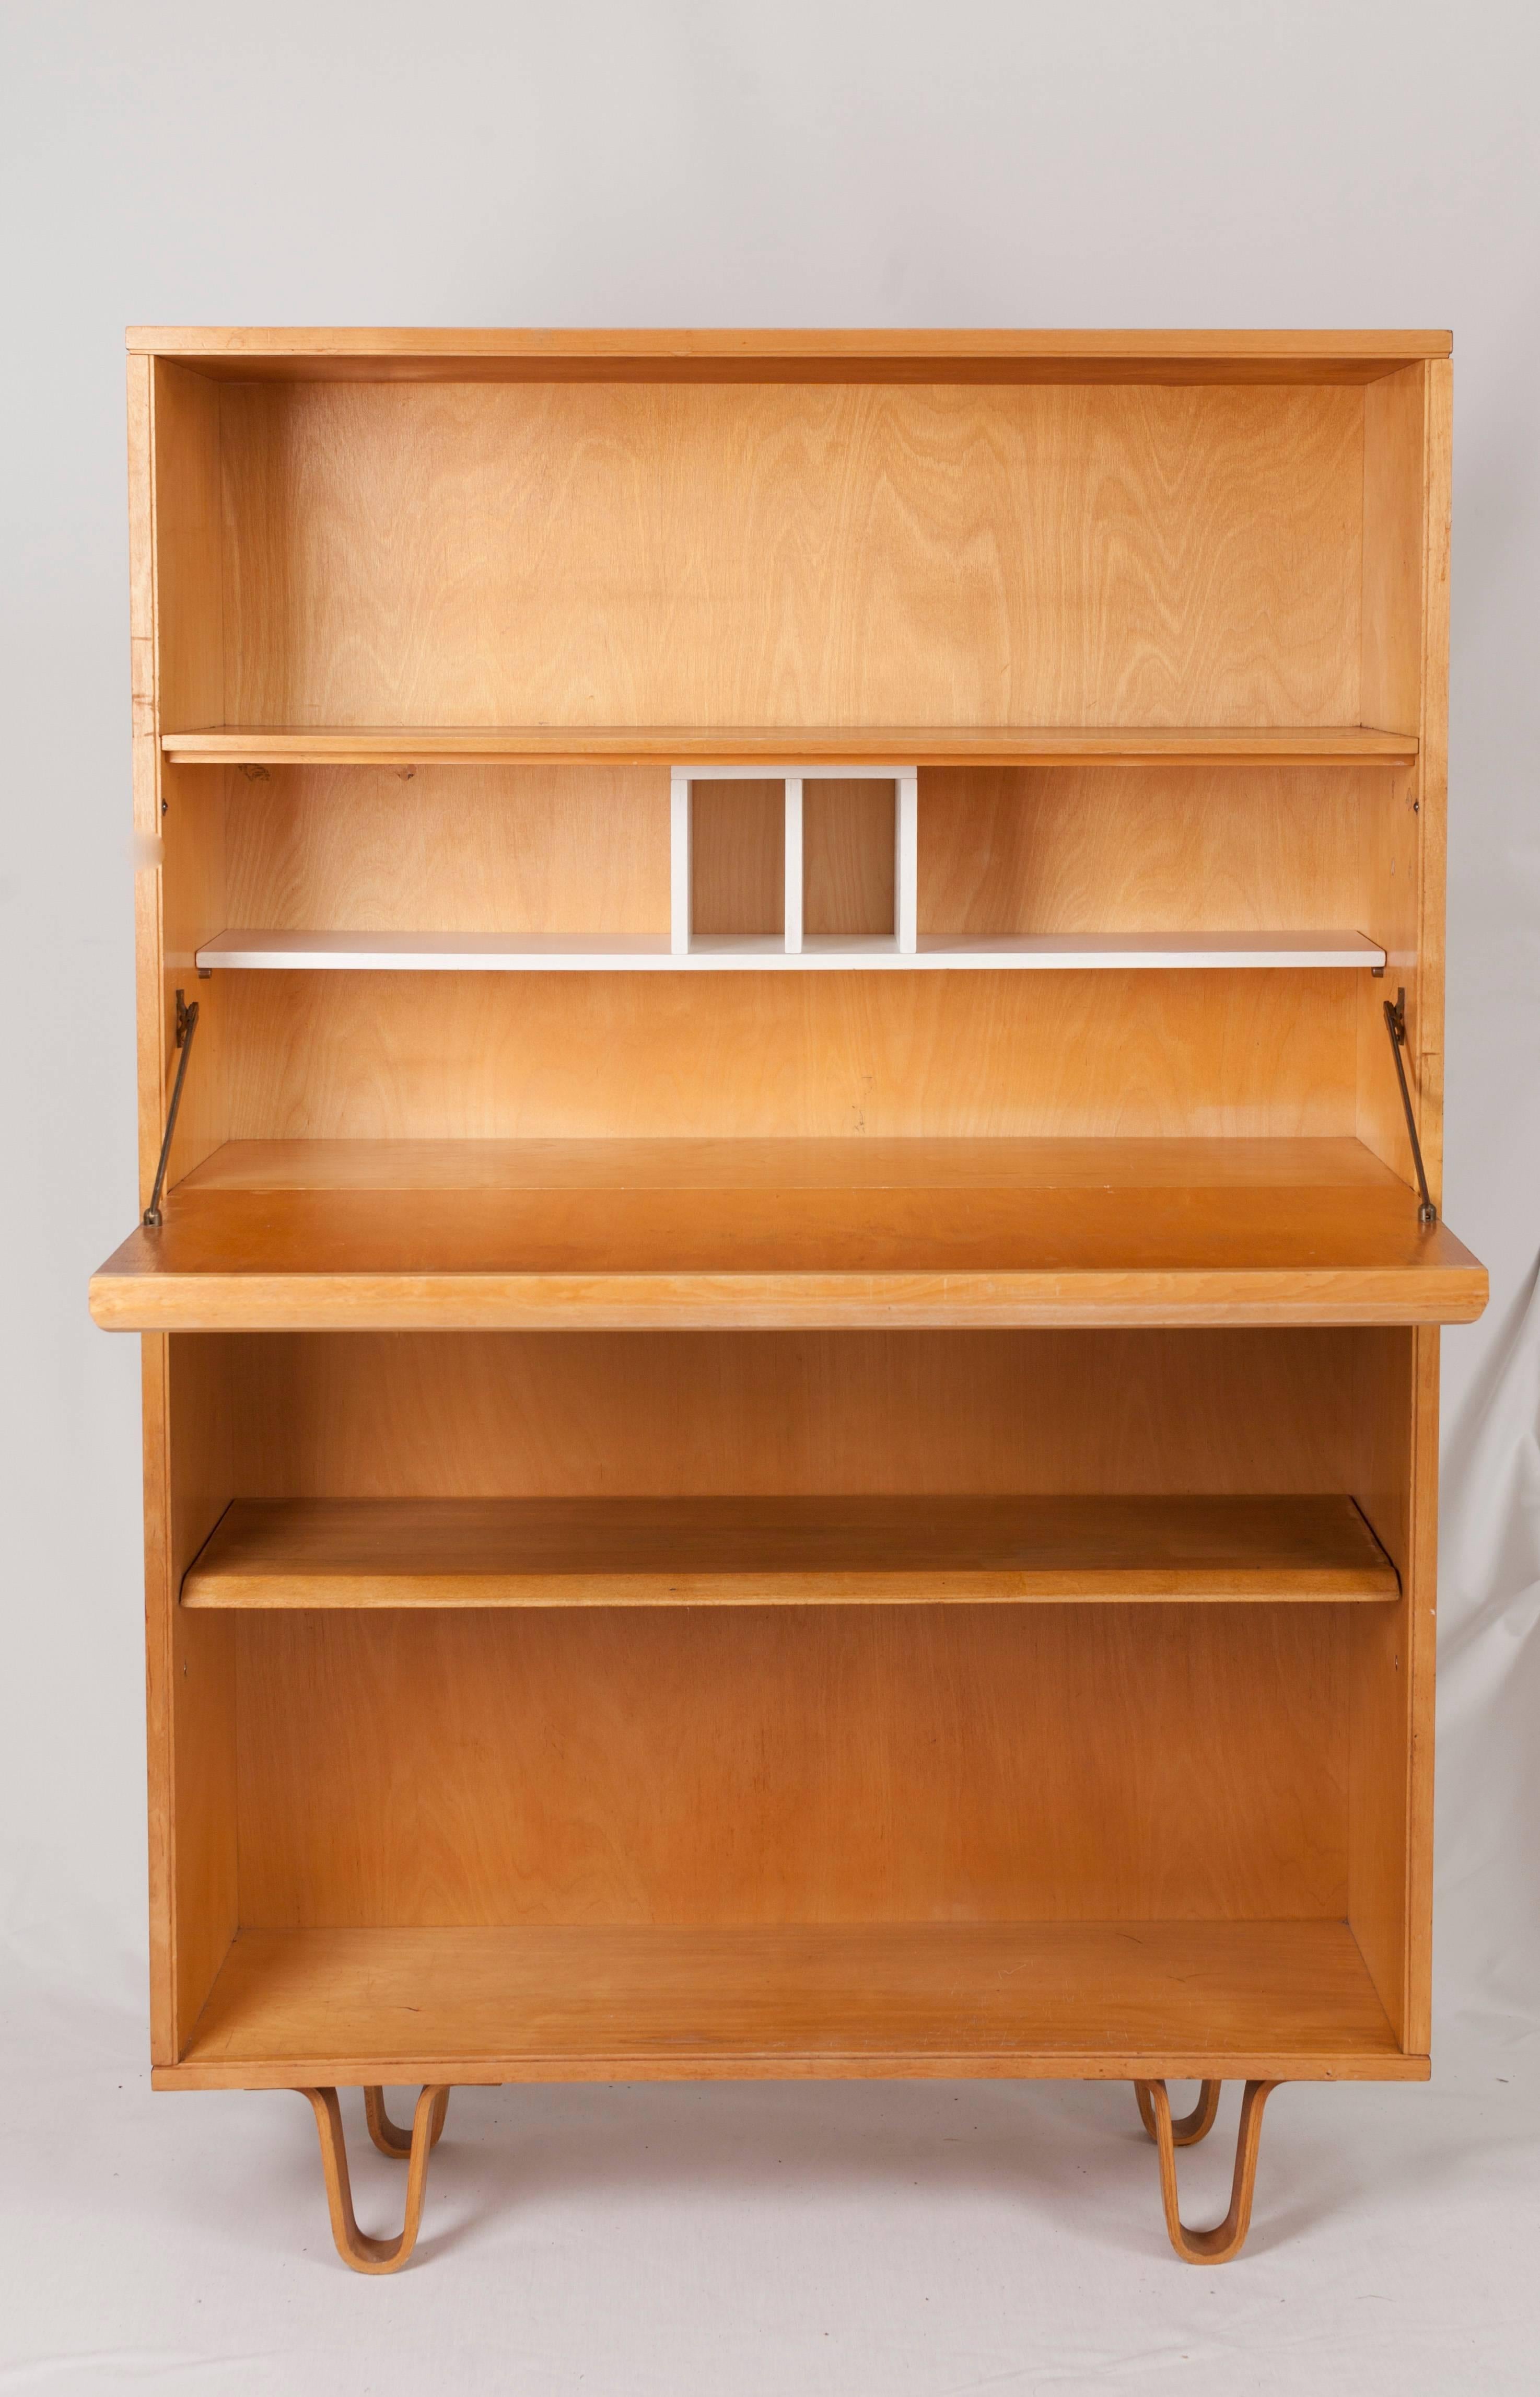 Midcentury Bookcases slash Writing Desks BB02 by Cees Braakman for Pastoe.

Just open the flap and you turn the bookcase into a practical writing desk.

The birch wood, their butterfly shaped legs and the white inner lay-out make the bookcases slash